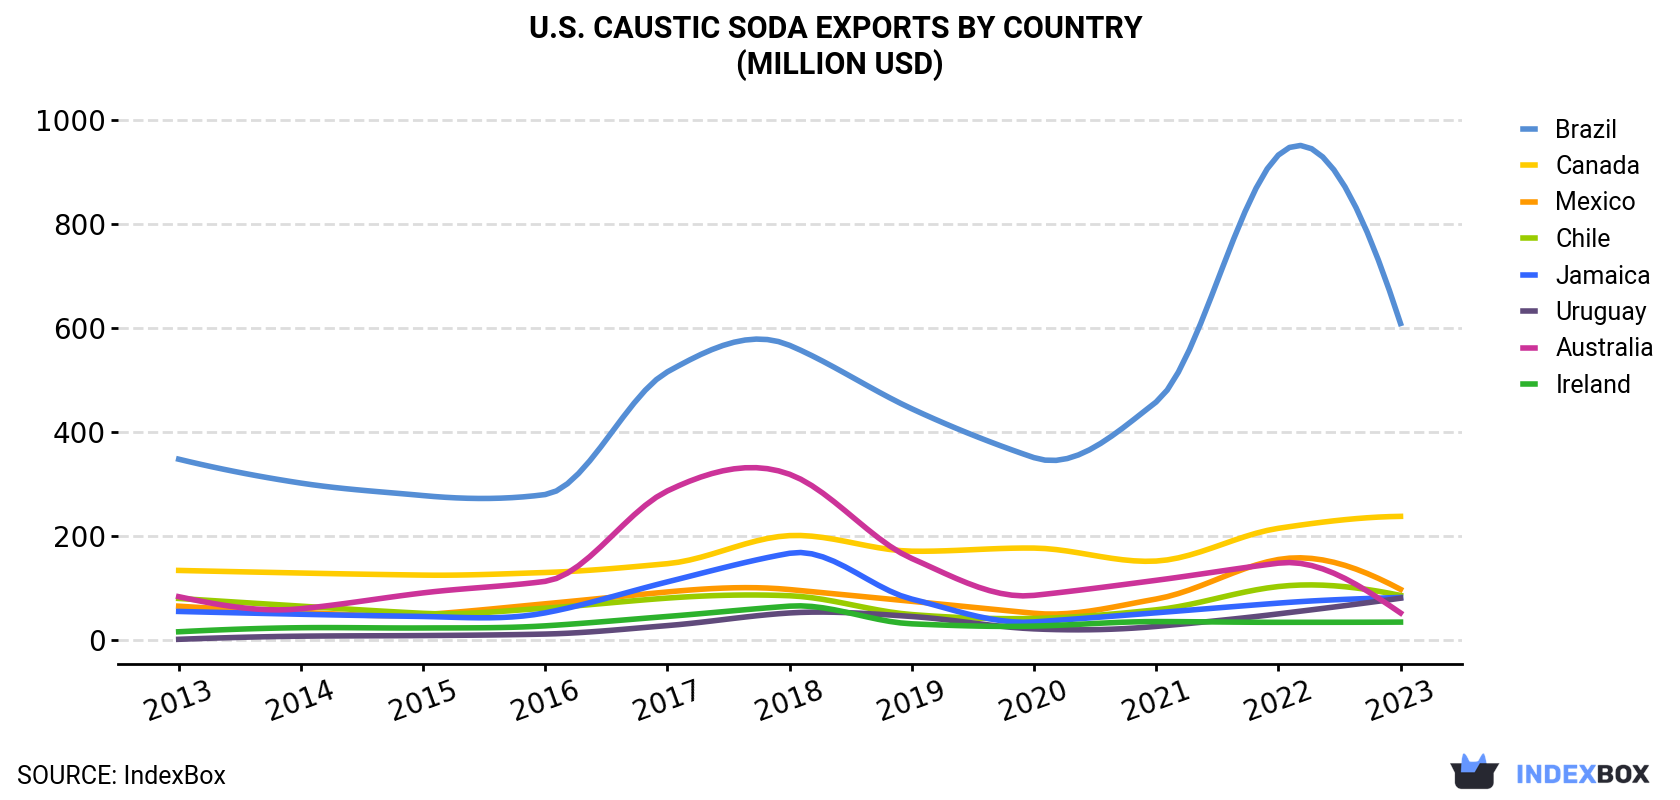 U.S. Caustic Soda Exports By Country (Million USD)